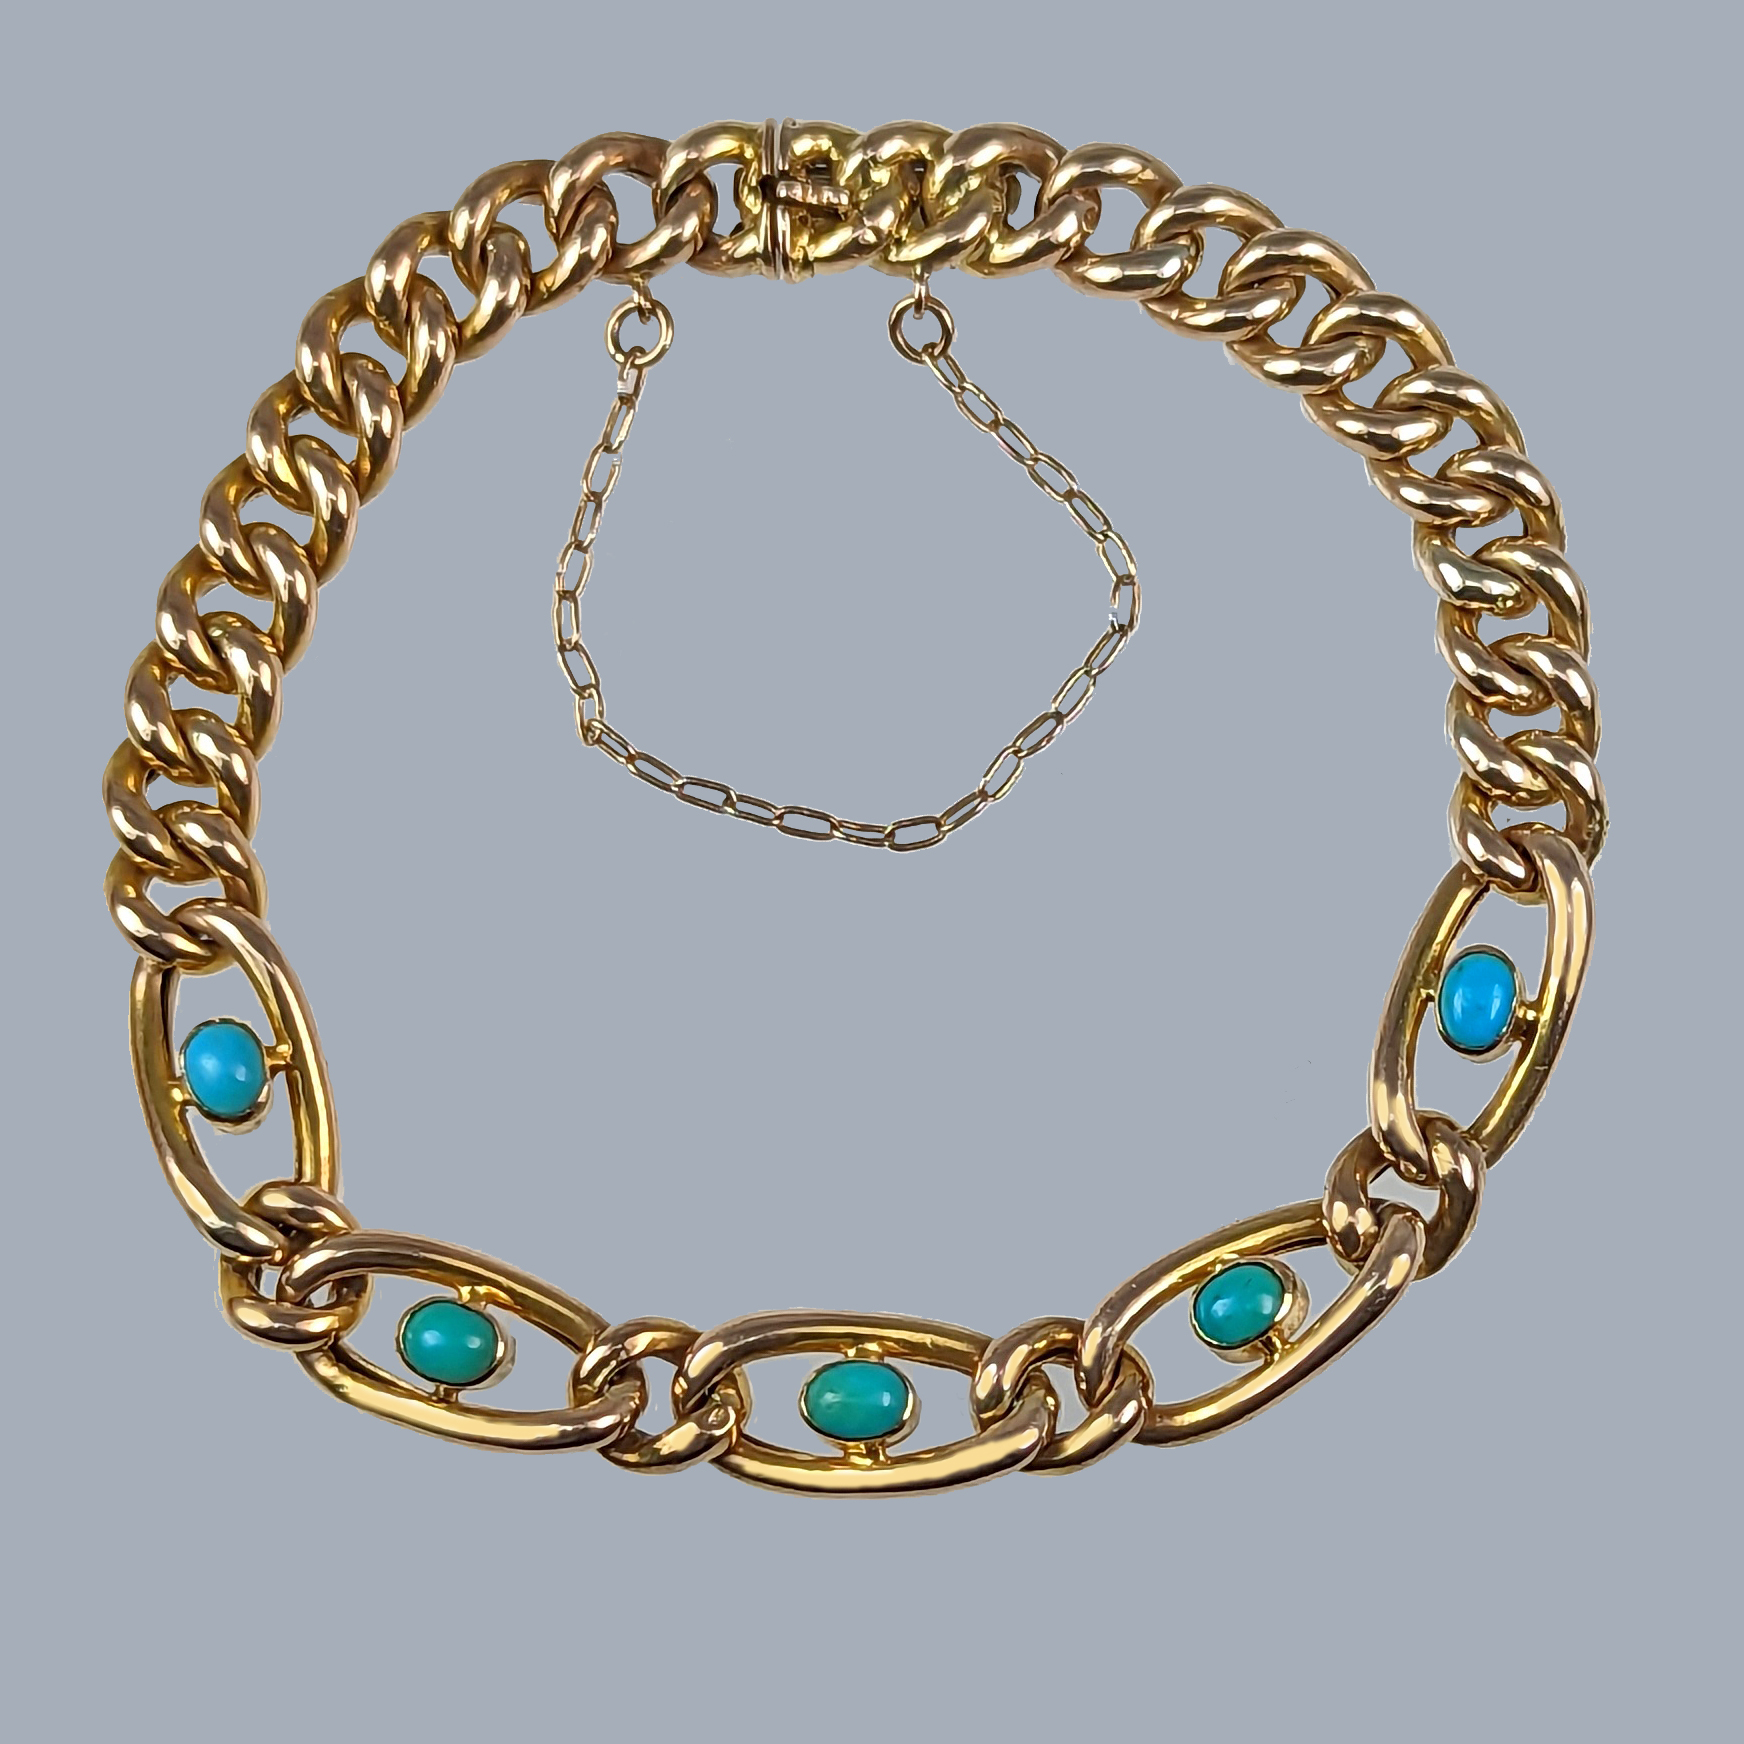 Turquoise 18ct Gold Bracelet, Large Turquoise with Grooved 18k Gold Beads  Station Bracelet. - Addy's Vintage